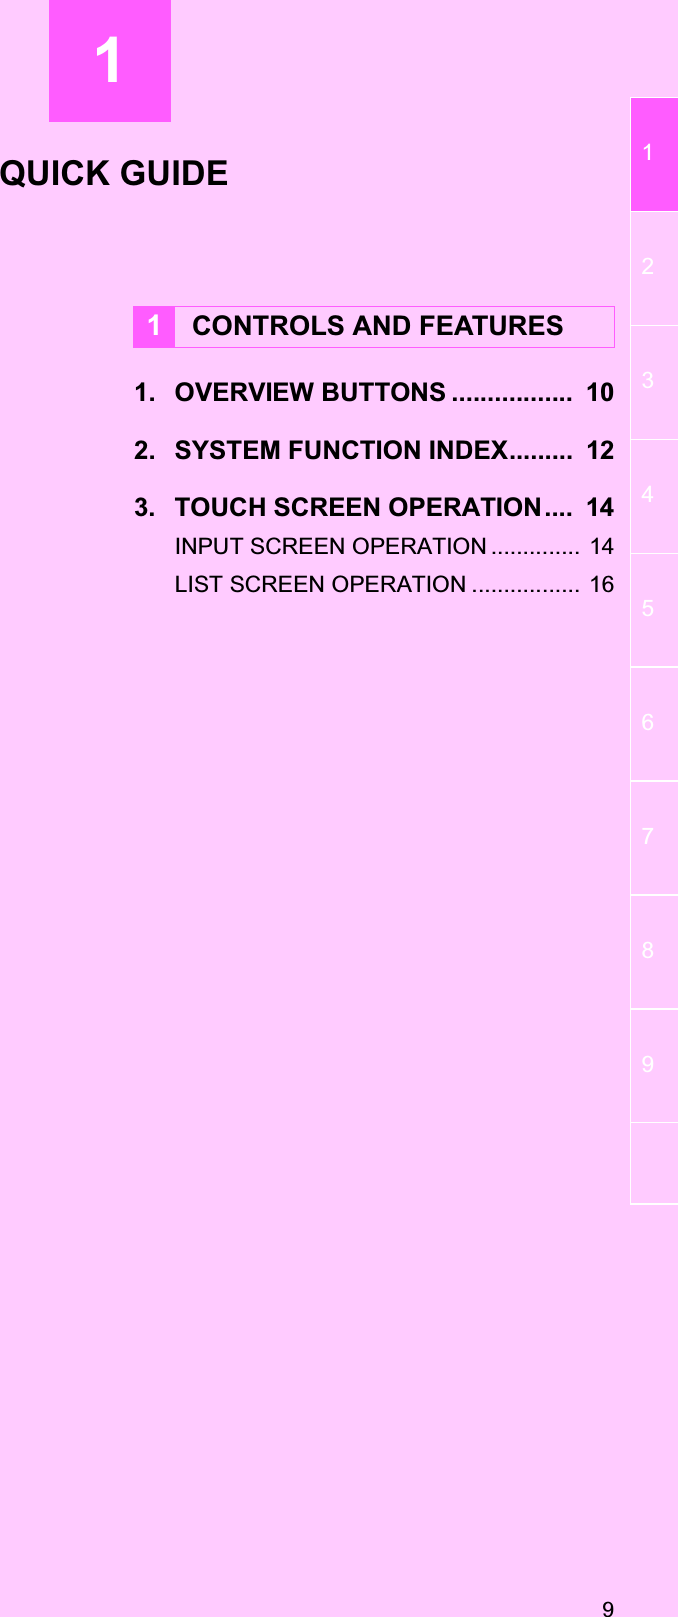 191234567891. OVERVIEW BUTTONS .................  102. SYSTEM FUNCTION INDEX.........  123. TOUCH SCREEN OPERATION....  14INPUT SCREEN OPERATION .............. 14LIST SCREEN OPERATION ................. 161CONTROLS AND FEATURESQUICK GUIDE